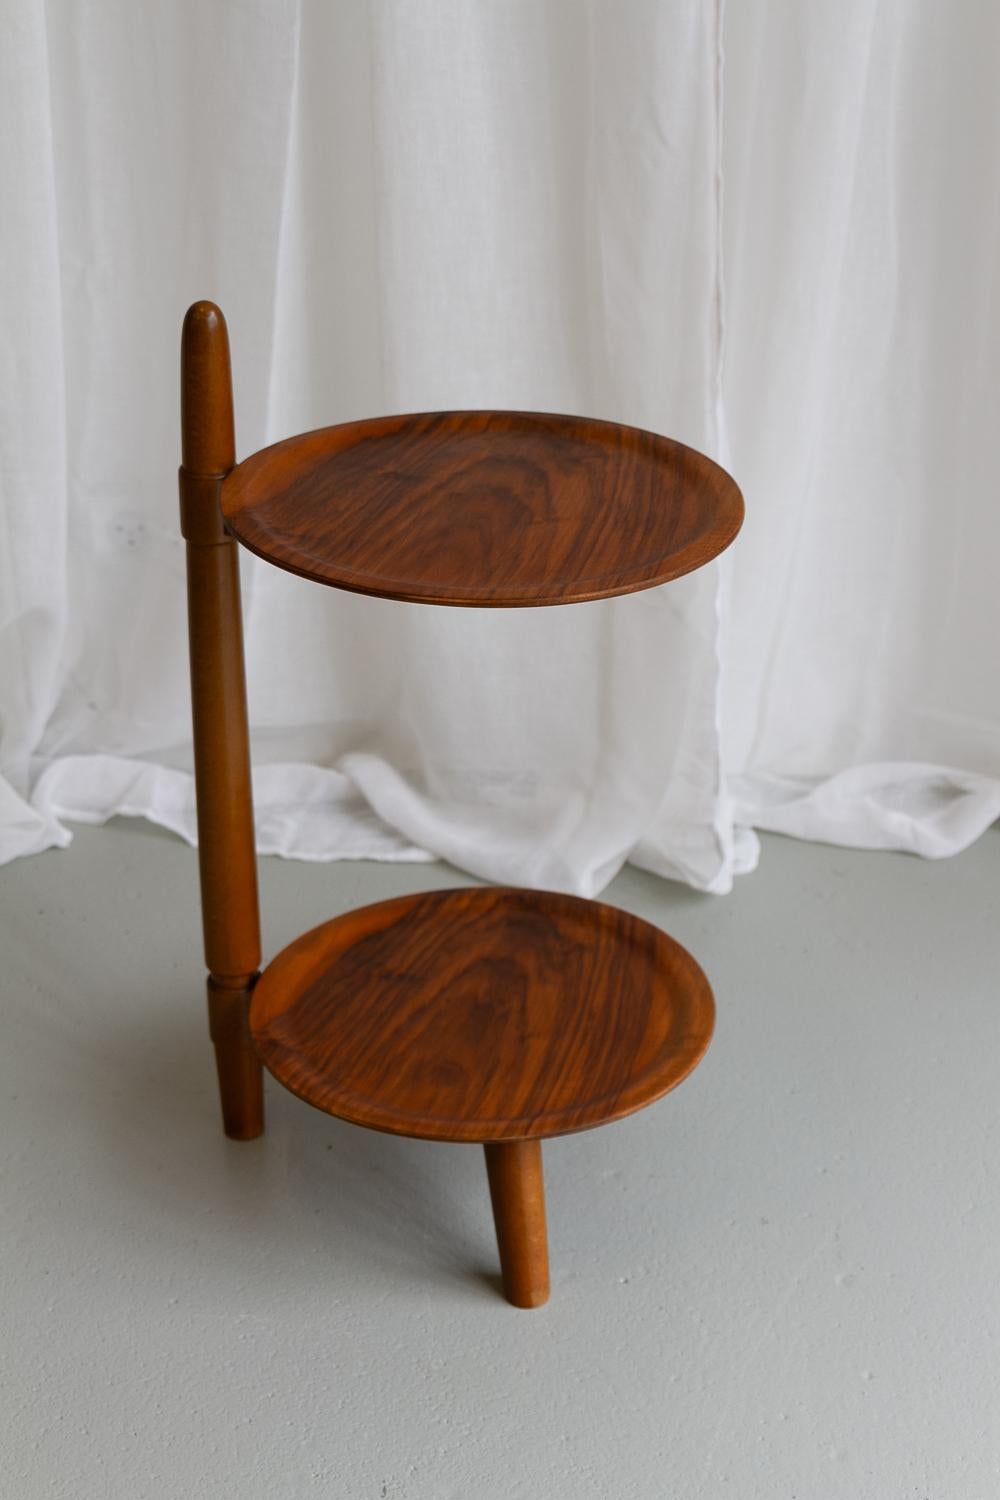 Danish Modern Teak and Beech Side Table by Edmund Jørgensen, 1950s.
Sculptural two tier side table with stained oak frame and round teak plywood tabletops.
Stable construction with three legs
Made at Edmund Jørgensens Møbelfabrik, Denmark in the